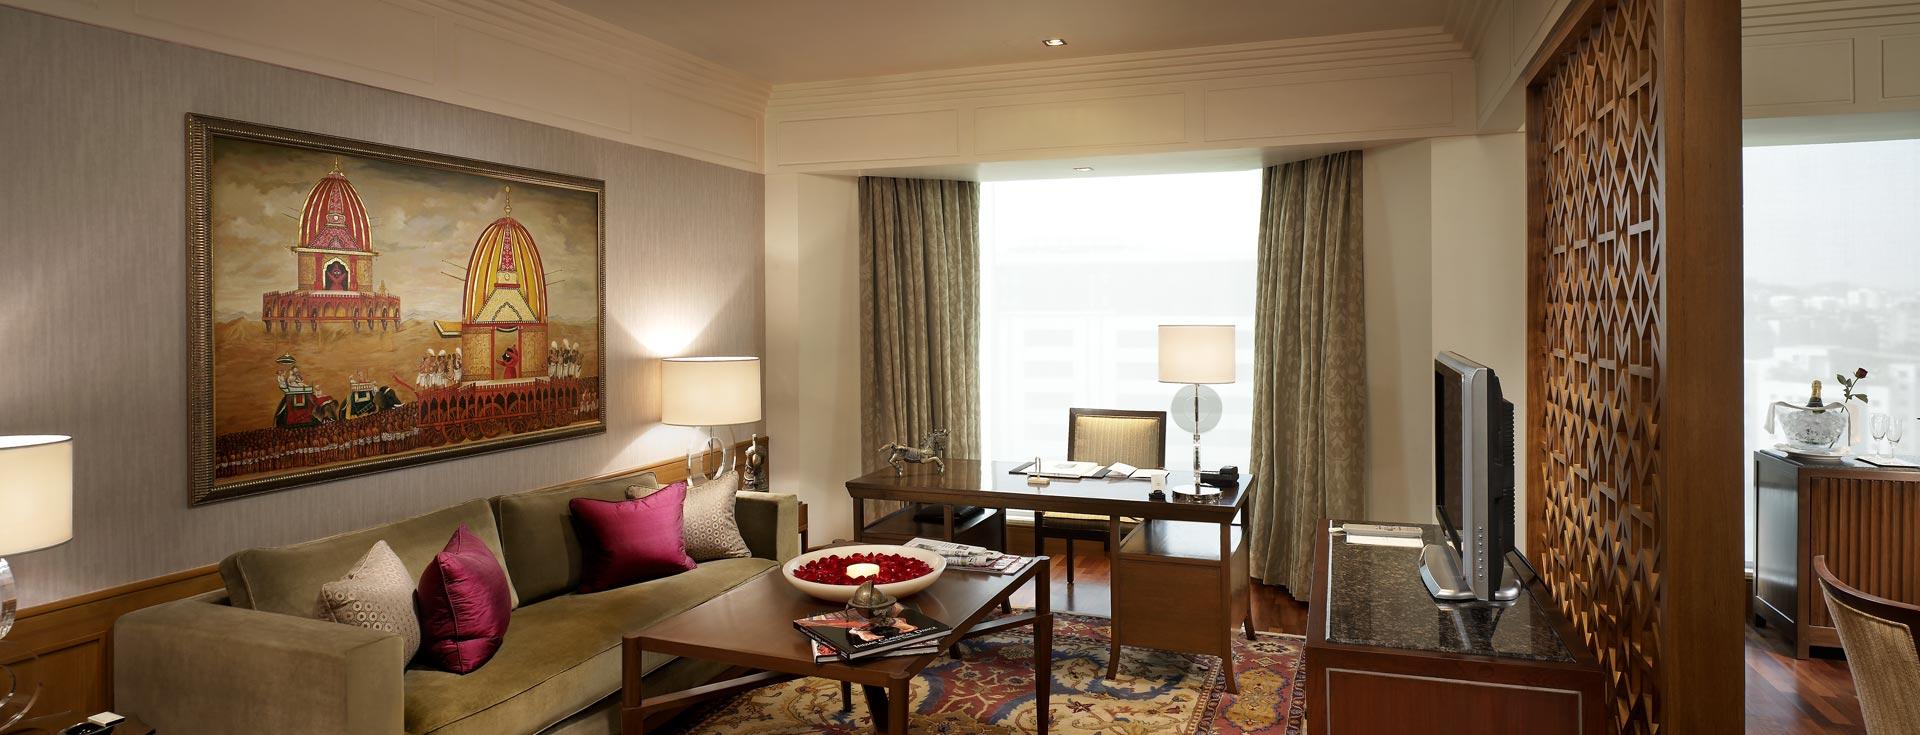 Upgrade to Our Spacious Norfolk Presidential Suite -The Main